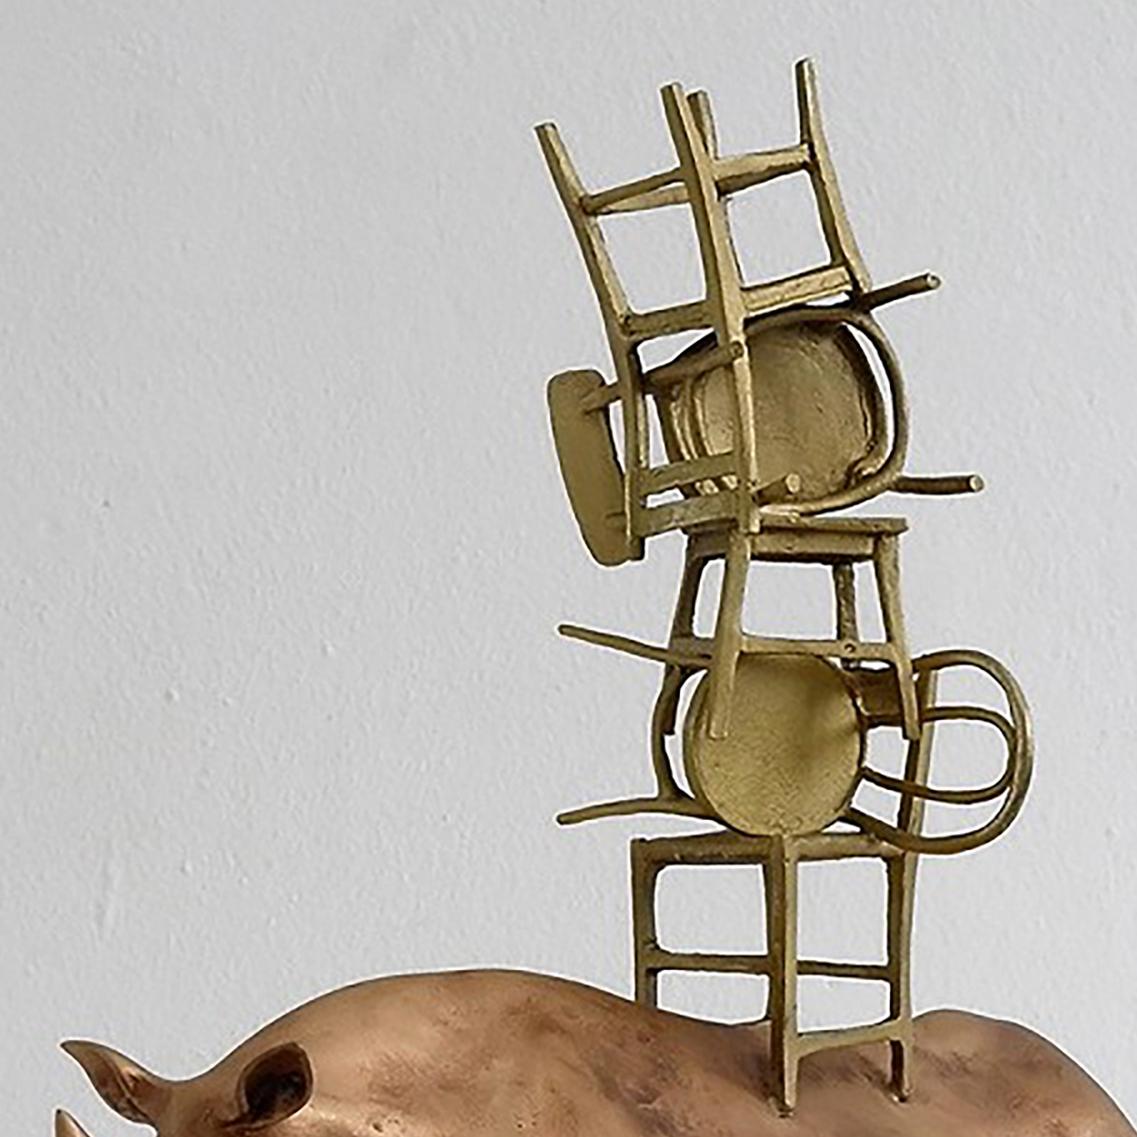 Italian 21st Century Rhino with Chairs Sculpture by Marcantonio, Polished Bronze For Sale